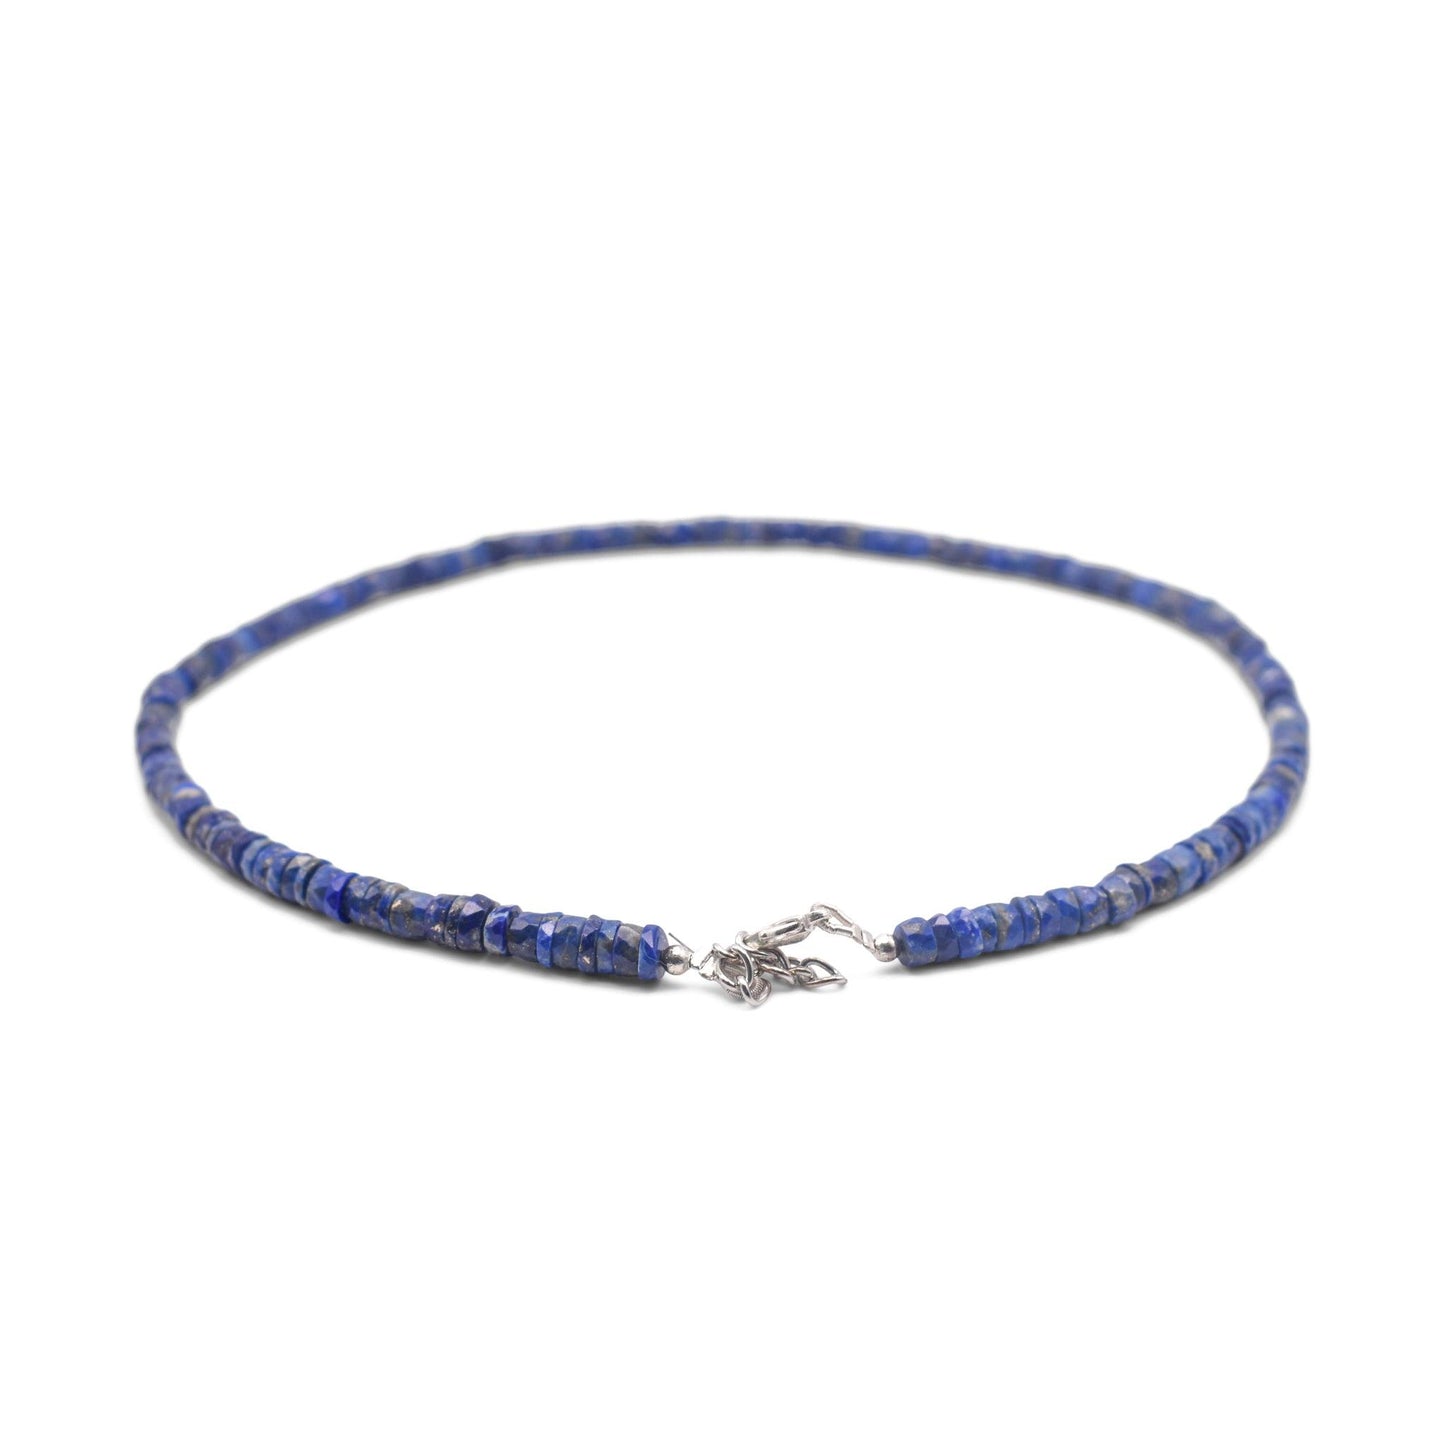 Lapis lazuli faceted cut beads necklace back angle